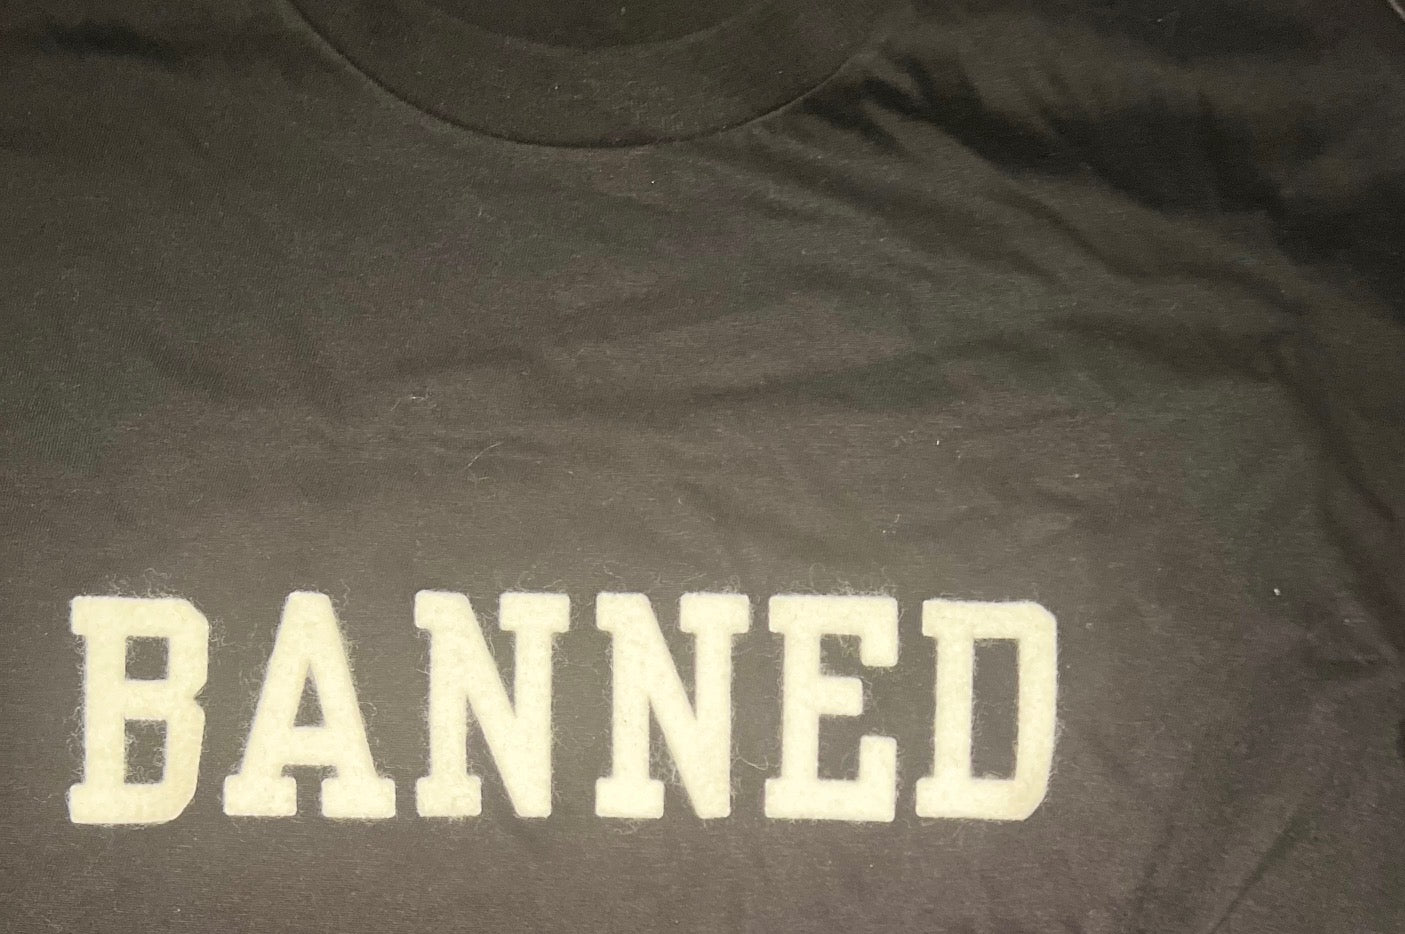 BANNED "COLLEGE" Felt Letters S/S T-Shirt